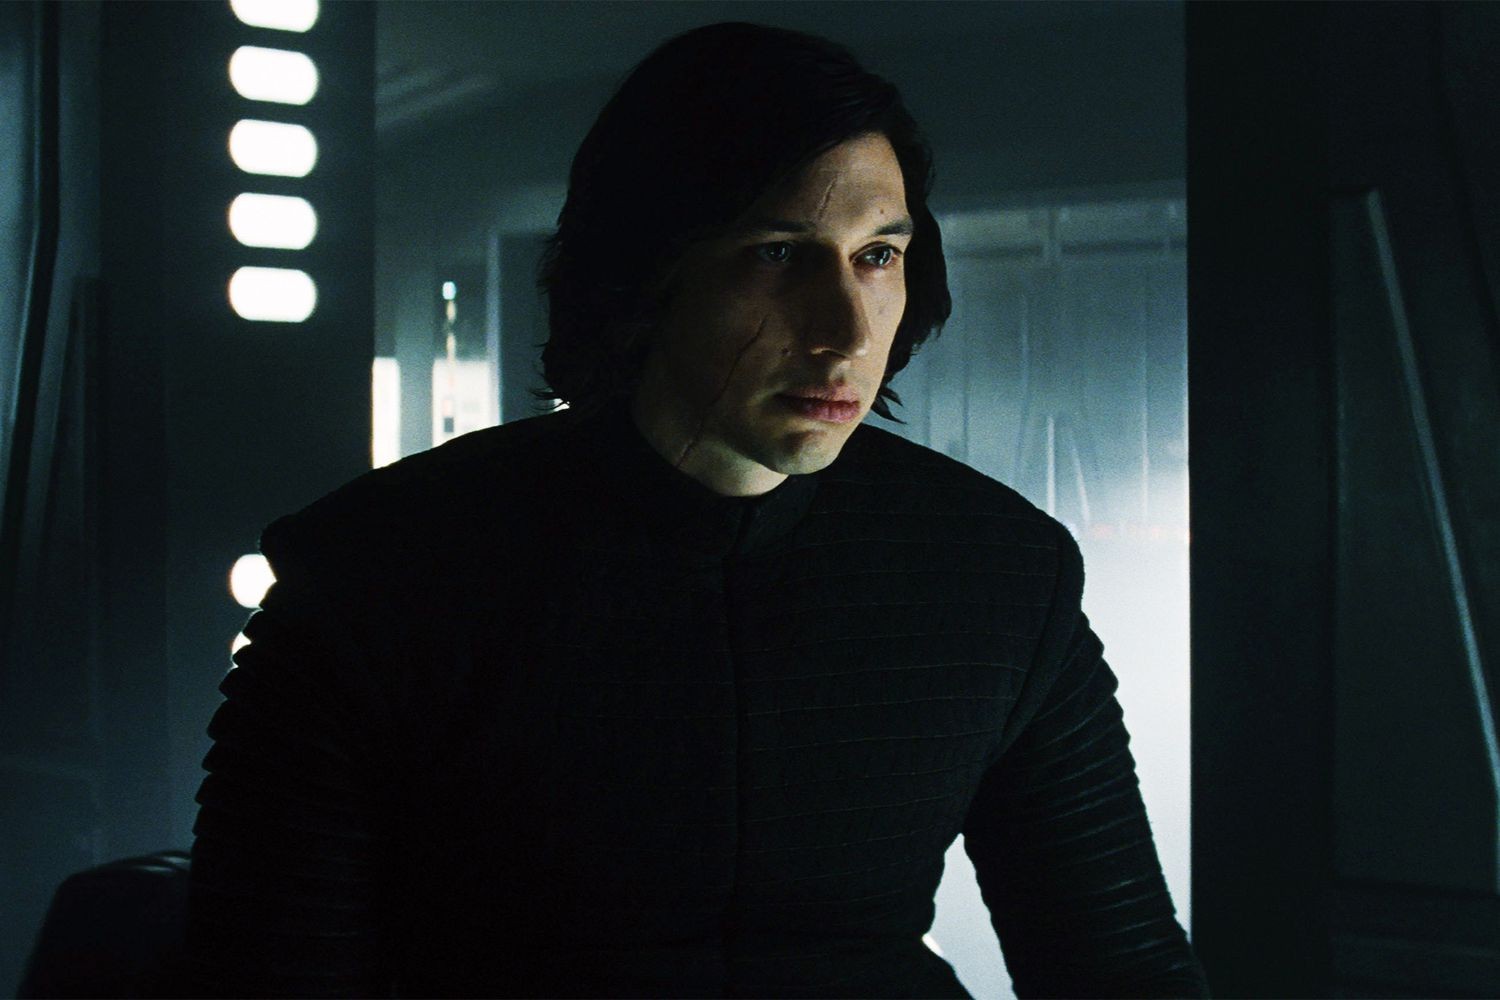 Adam driver dif not particularly enjoy his time on Star Wars 